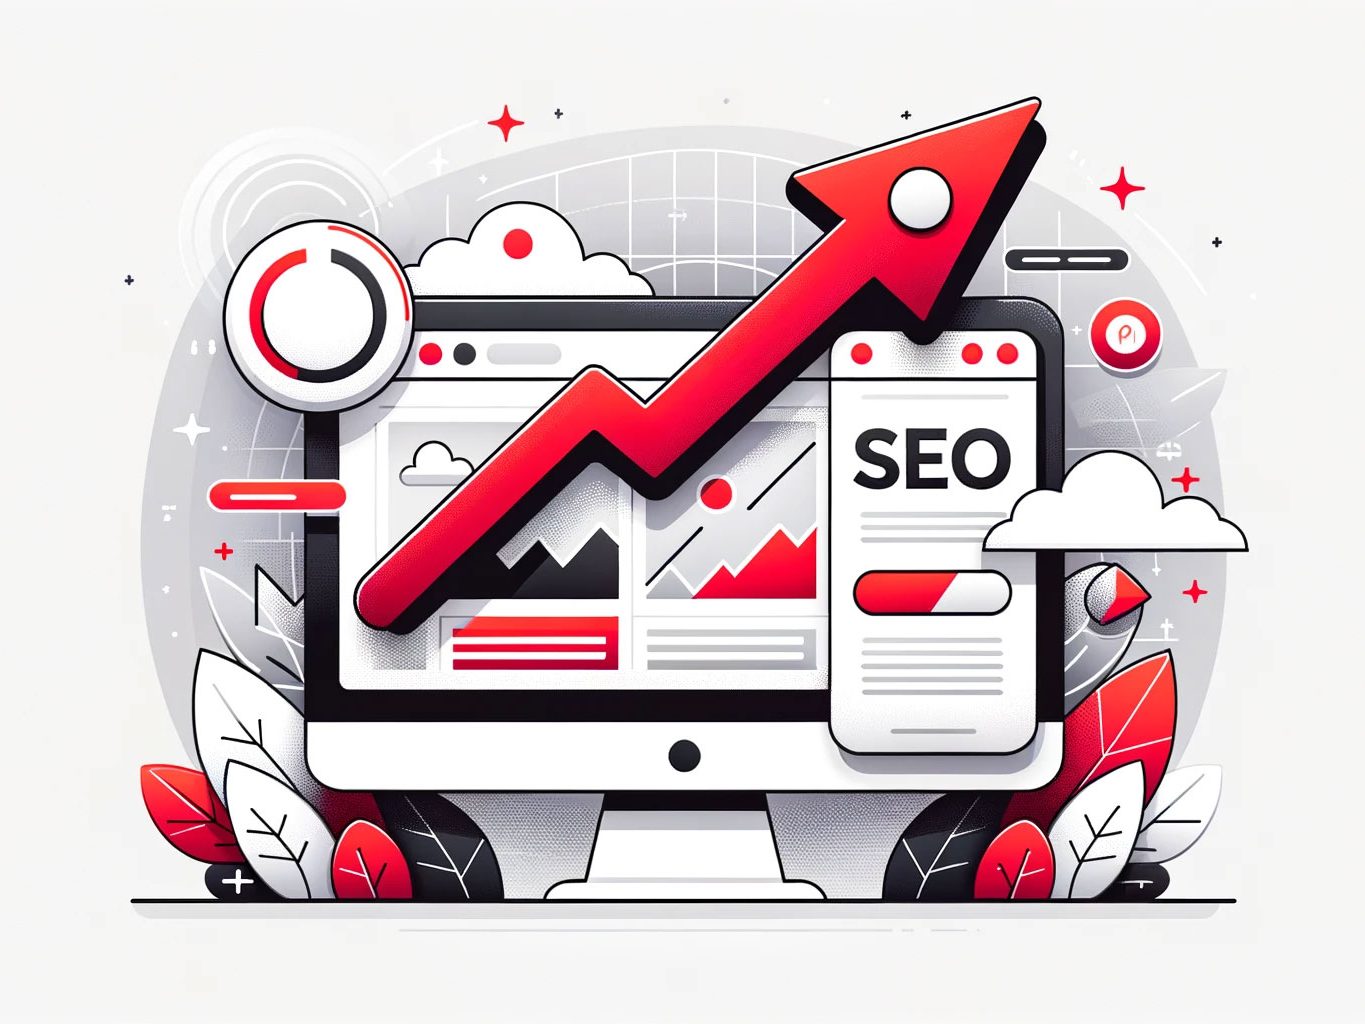 SGE : Improve Your Website's SEO